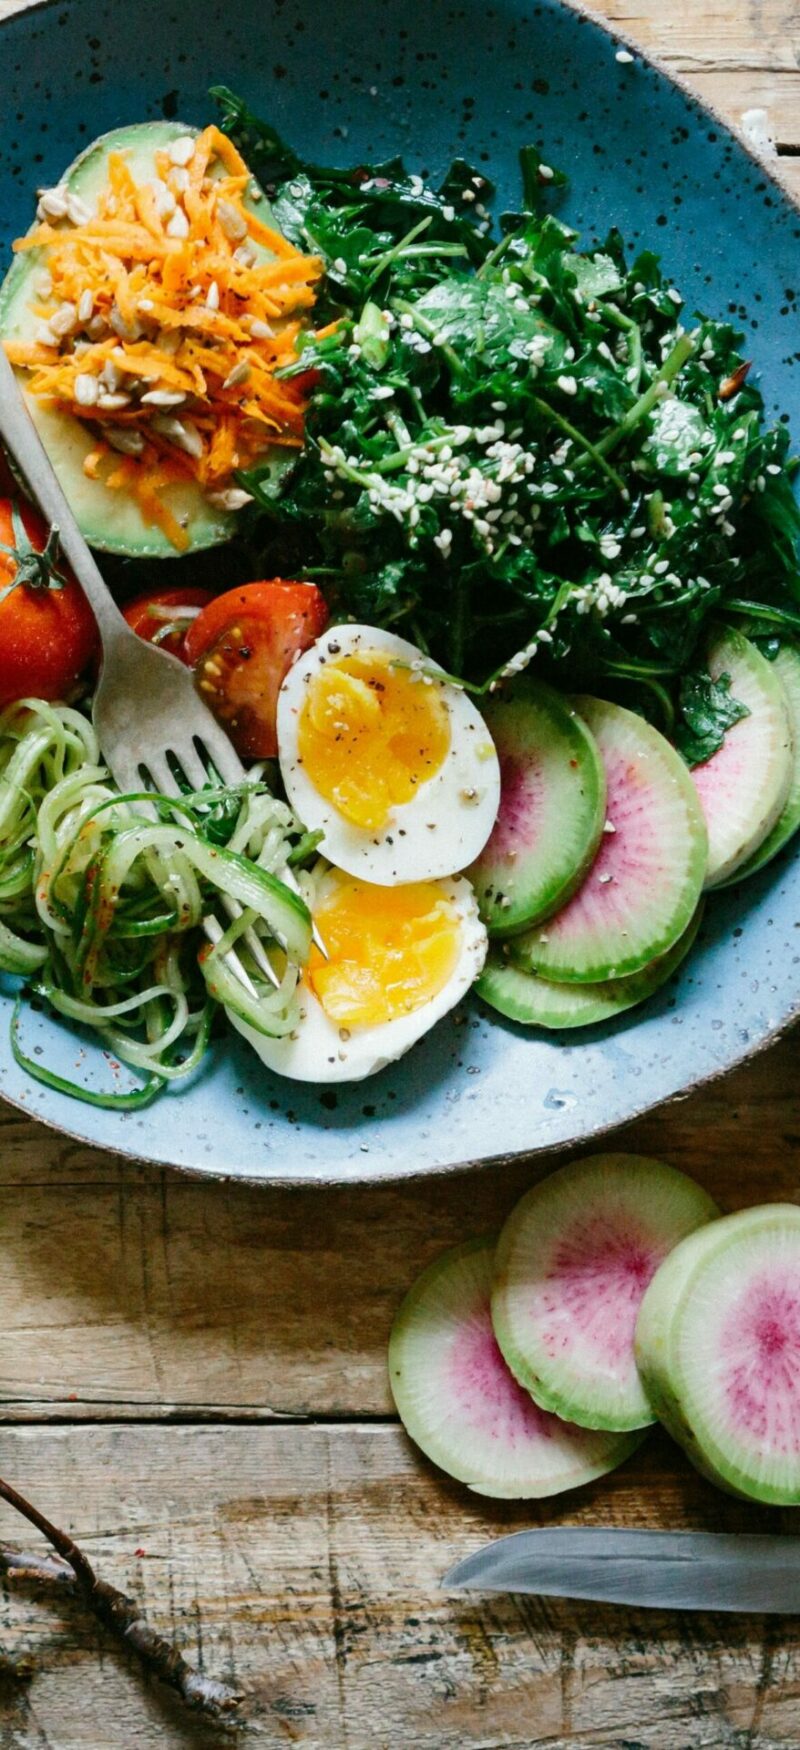 Healthy food, bowl with avocado, tomatoes, eggs and spinach